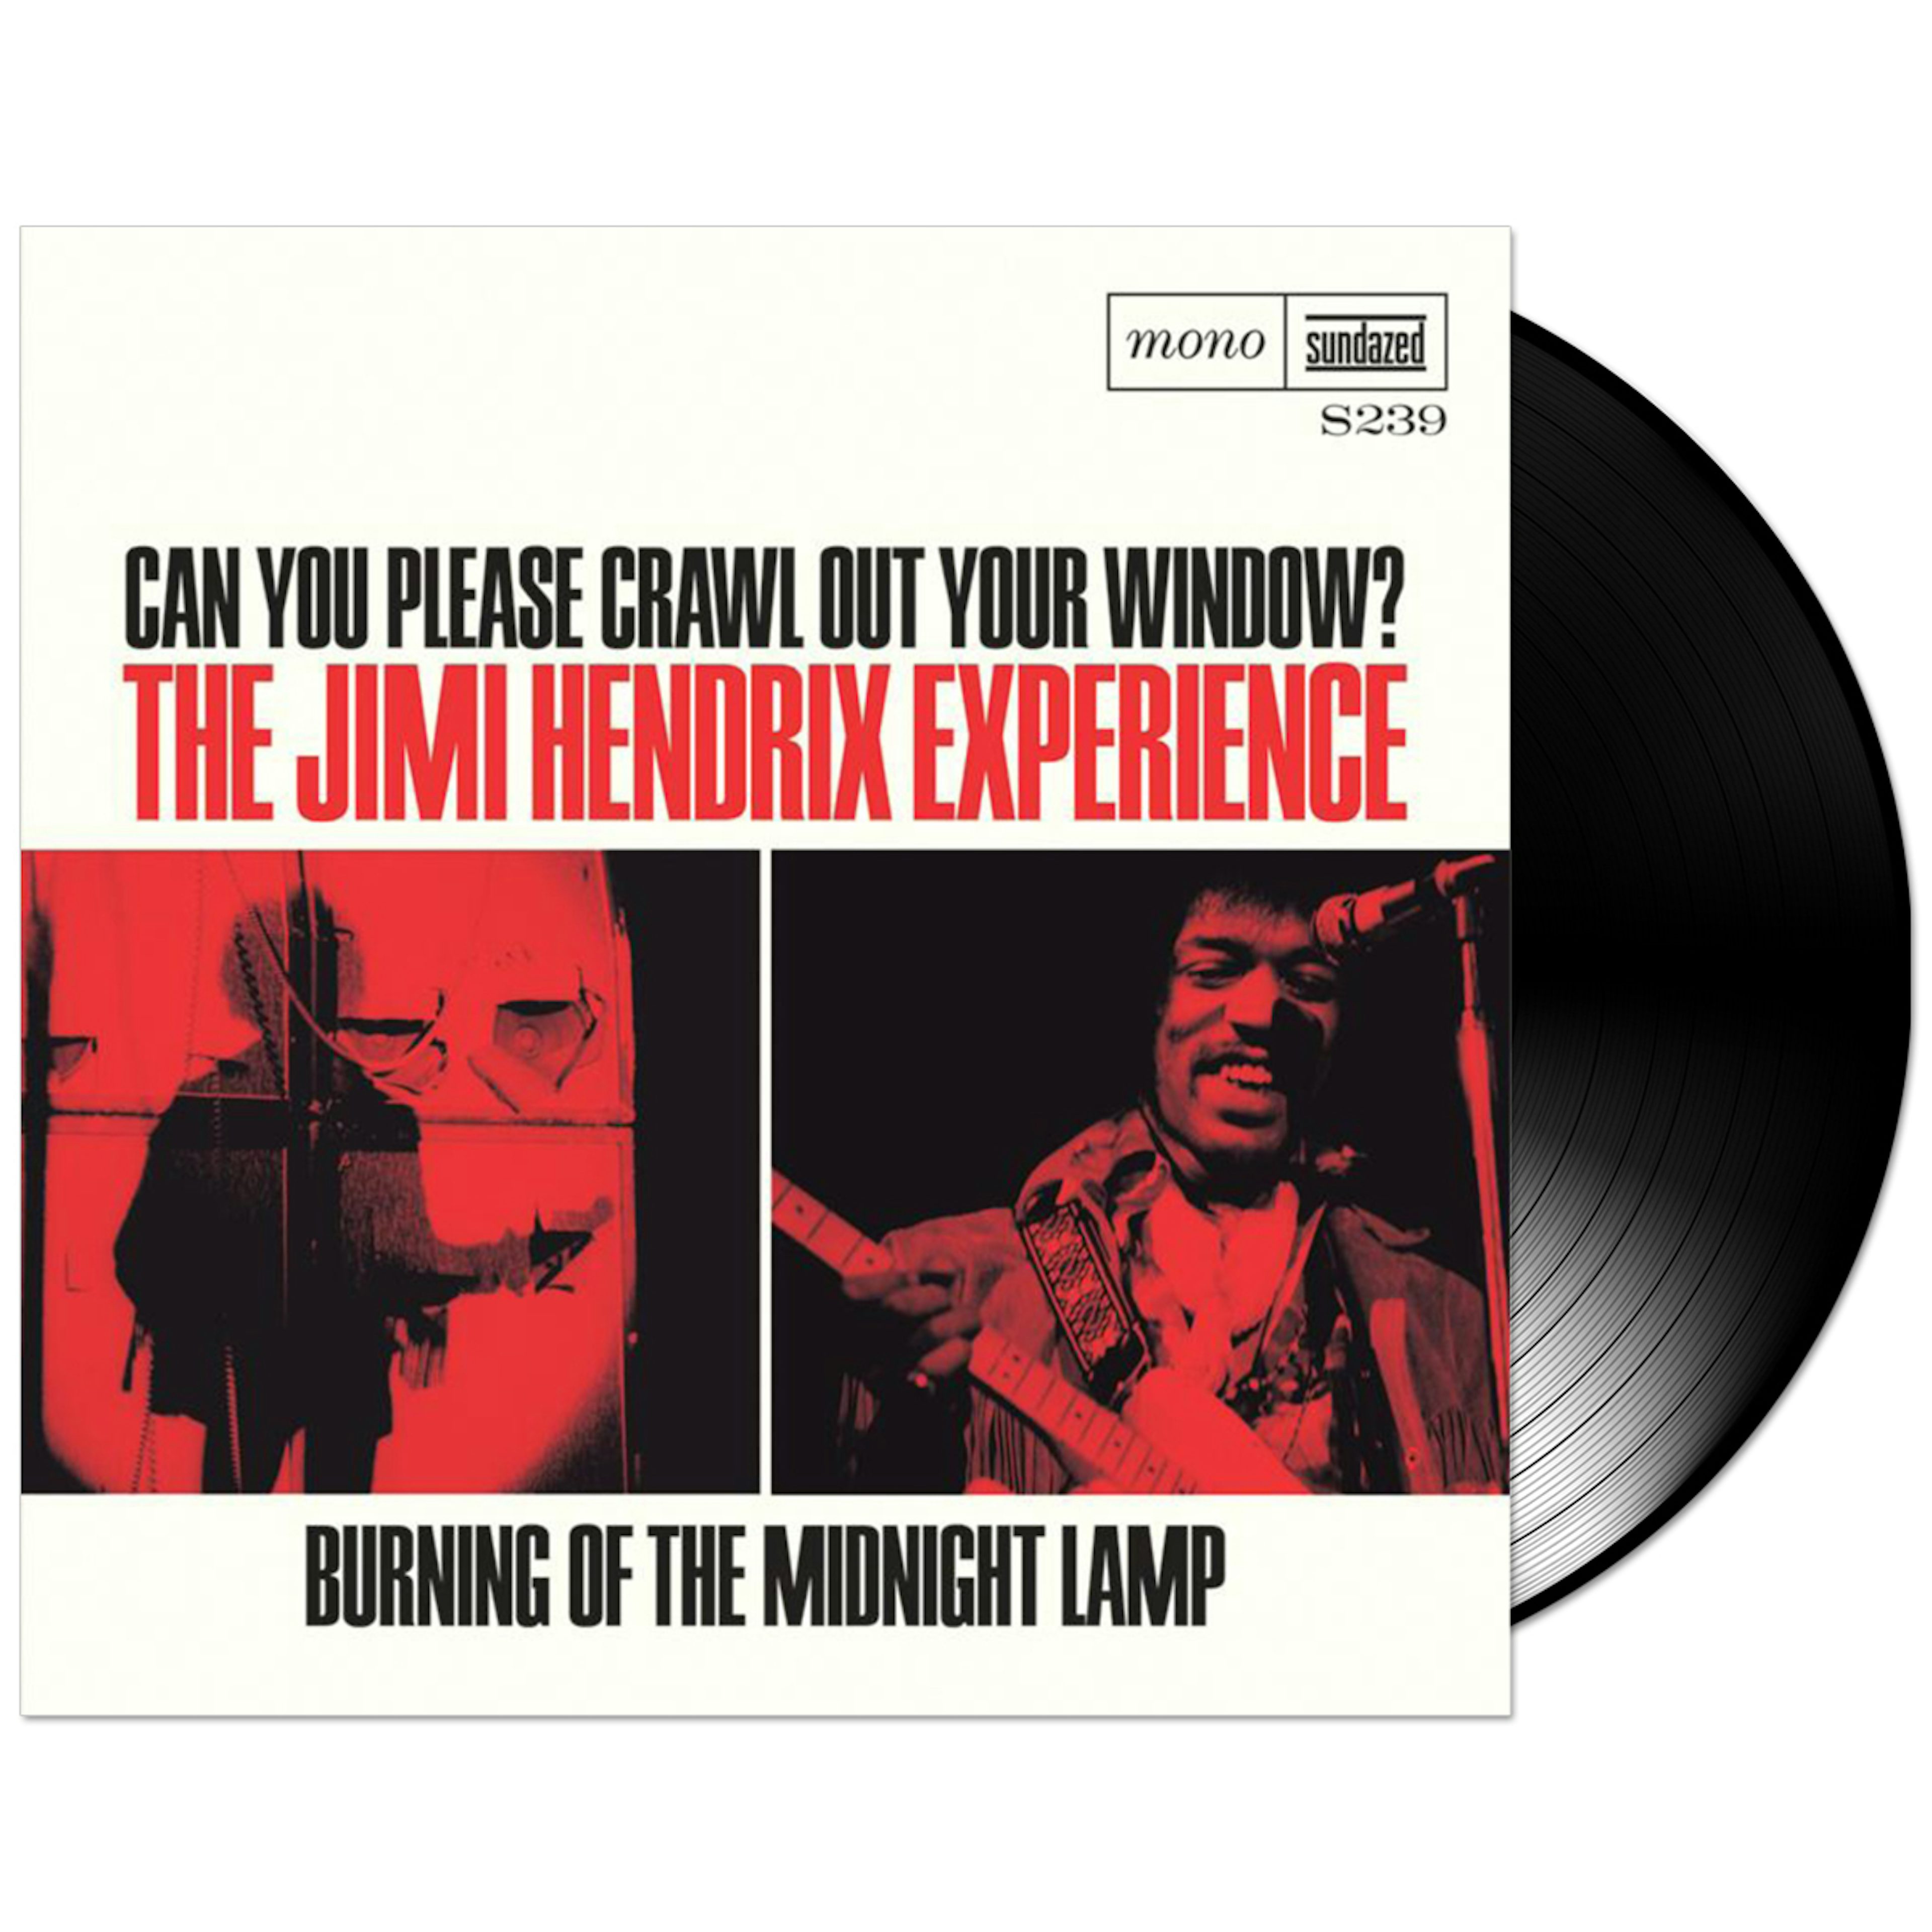 Uitbreiding Refrein token Jimi Hendrix: Can You Please Crawl Out Your Window/Burning Of The Midnight  Lamp 7" Vinyl Single